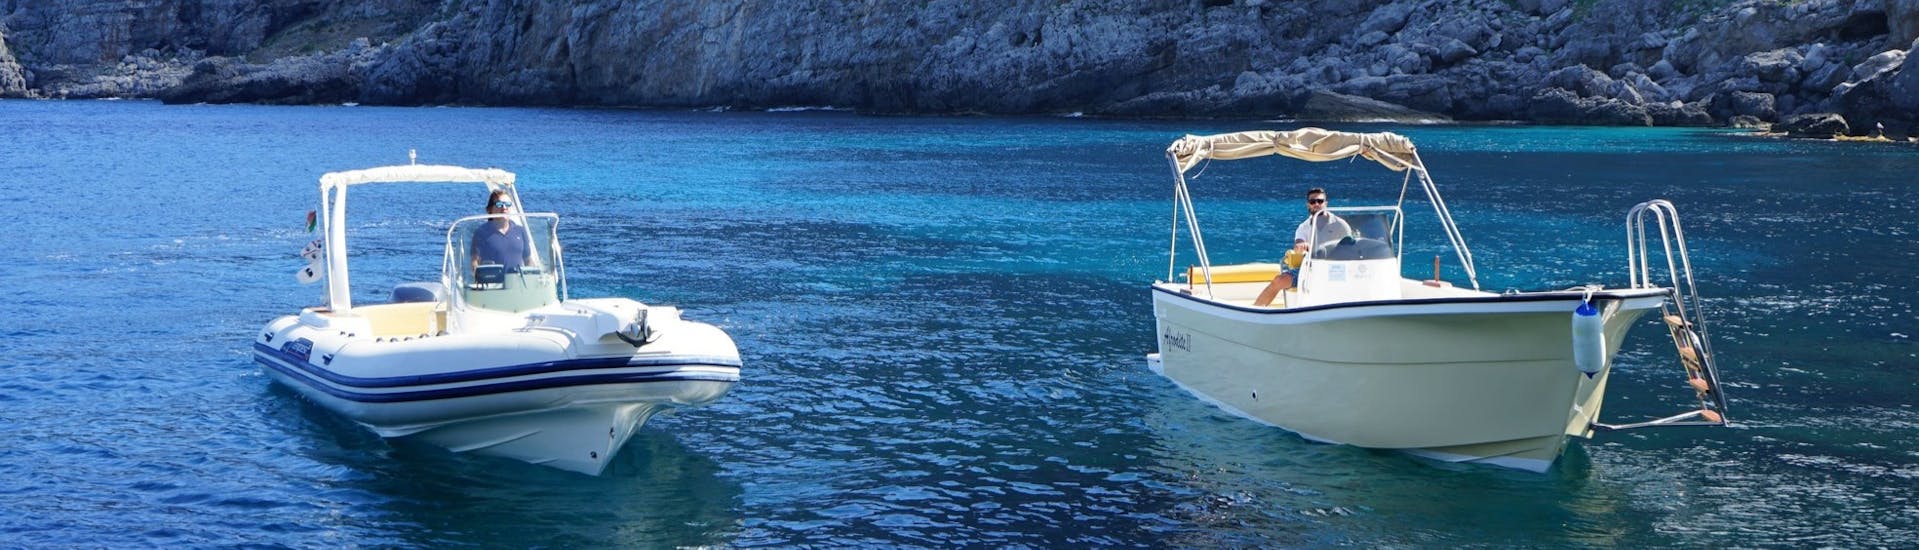 Boat Trip from Marettimo to Favignana and Levanzo with Swimming Stops.